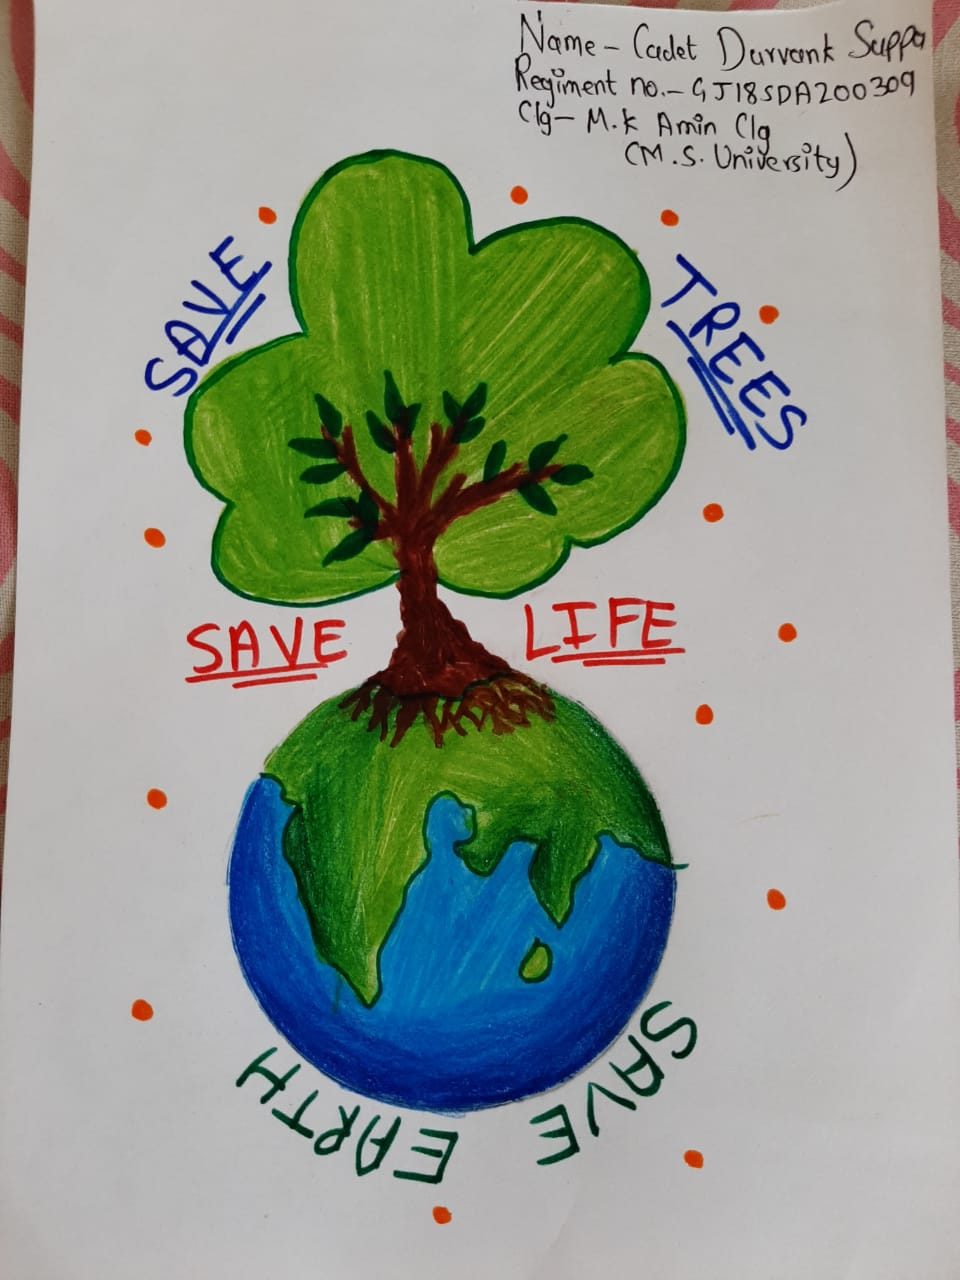 🏞️Save Nature + 🌳Save tree + 🐦Save birds = 🌏Save Earth Images • Prachi  patil (@2721171955) on ShareChat